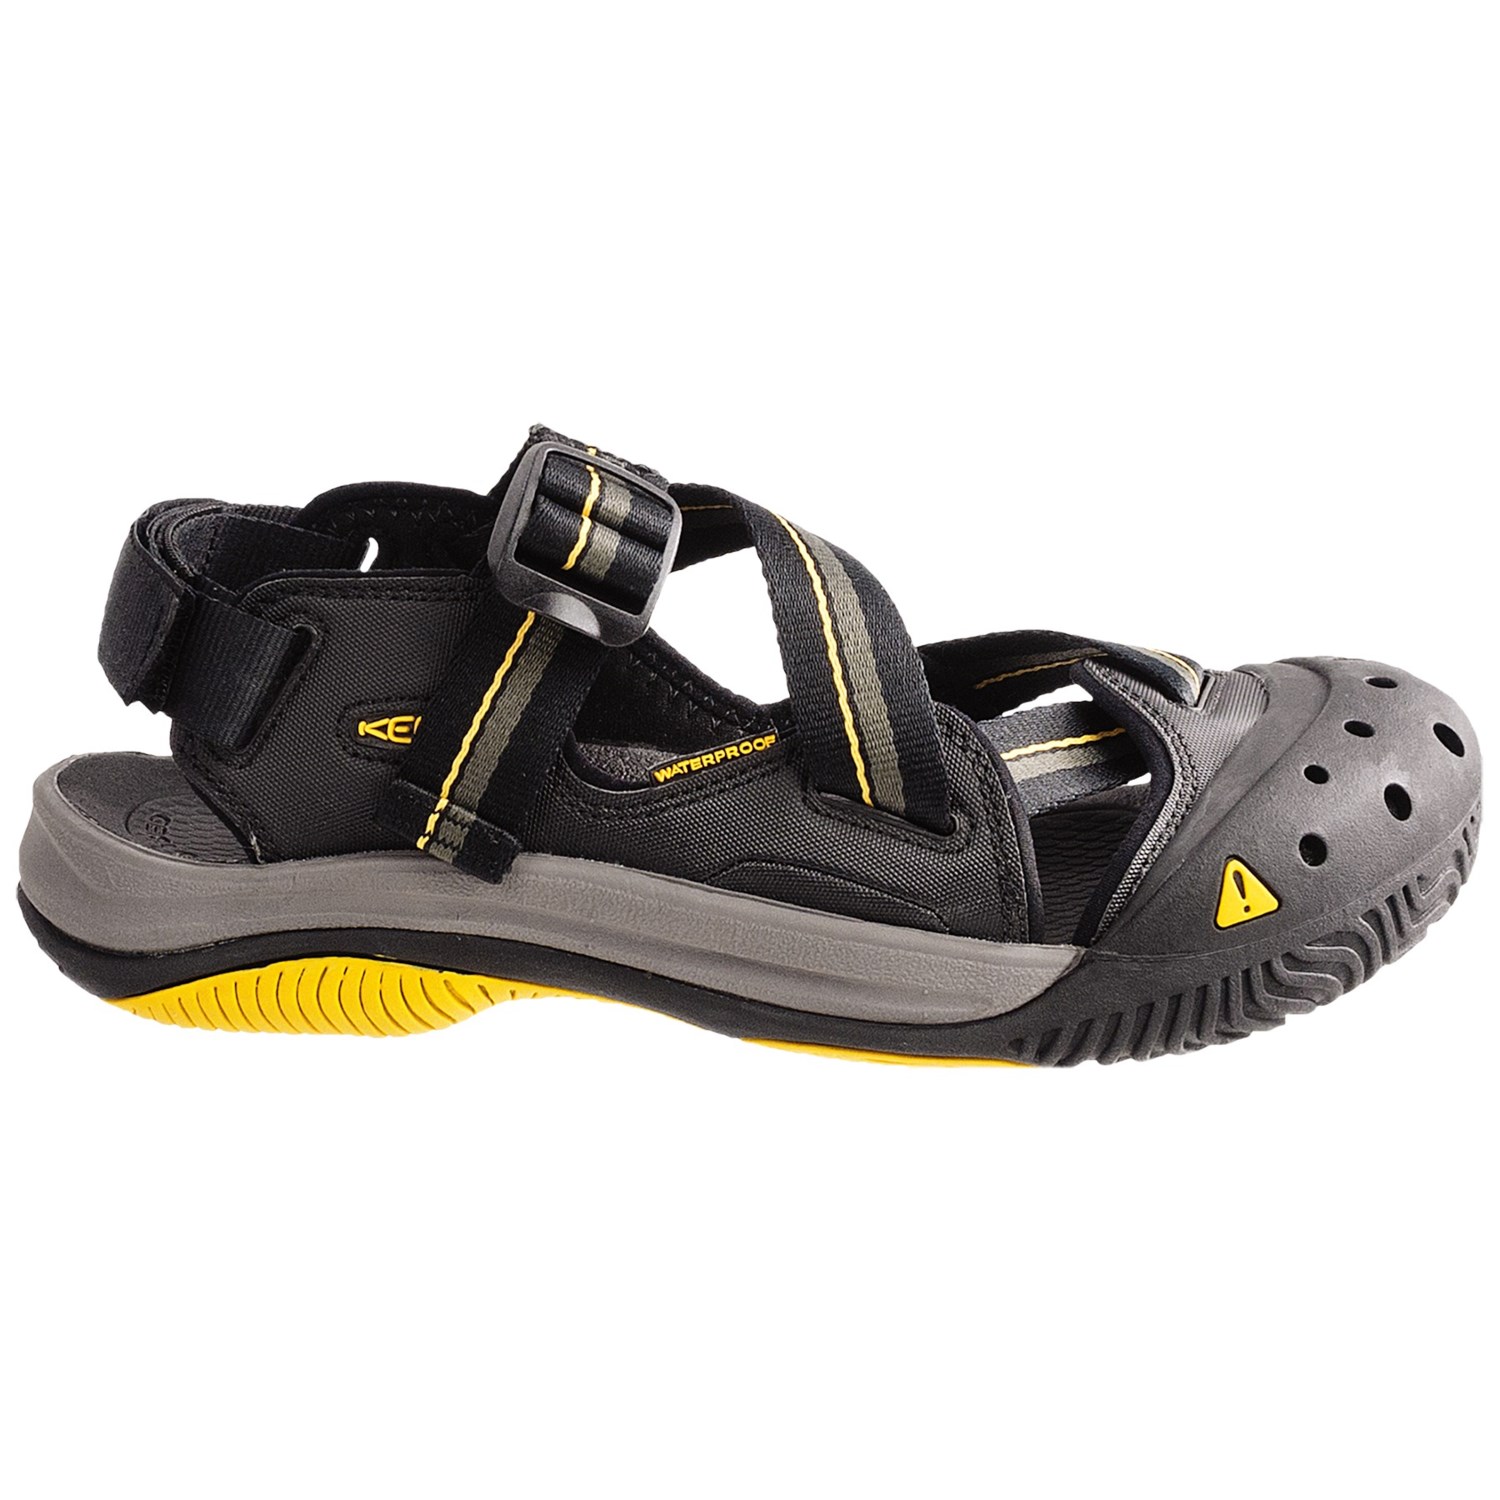 Keen Hydro Guide Sport Sandals (For Men) 6699H - Save 89%